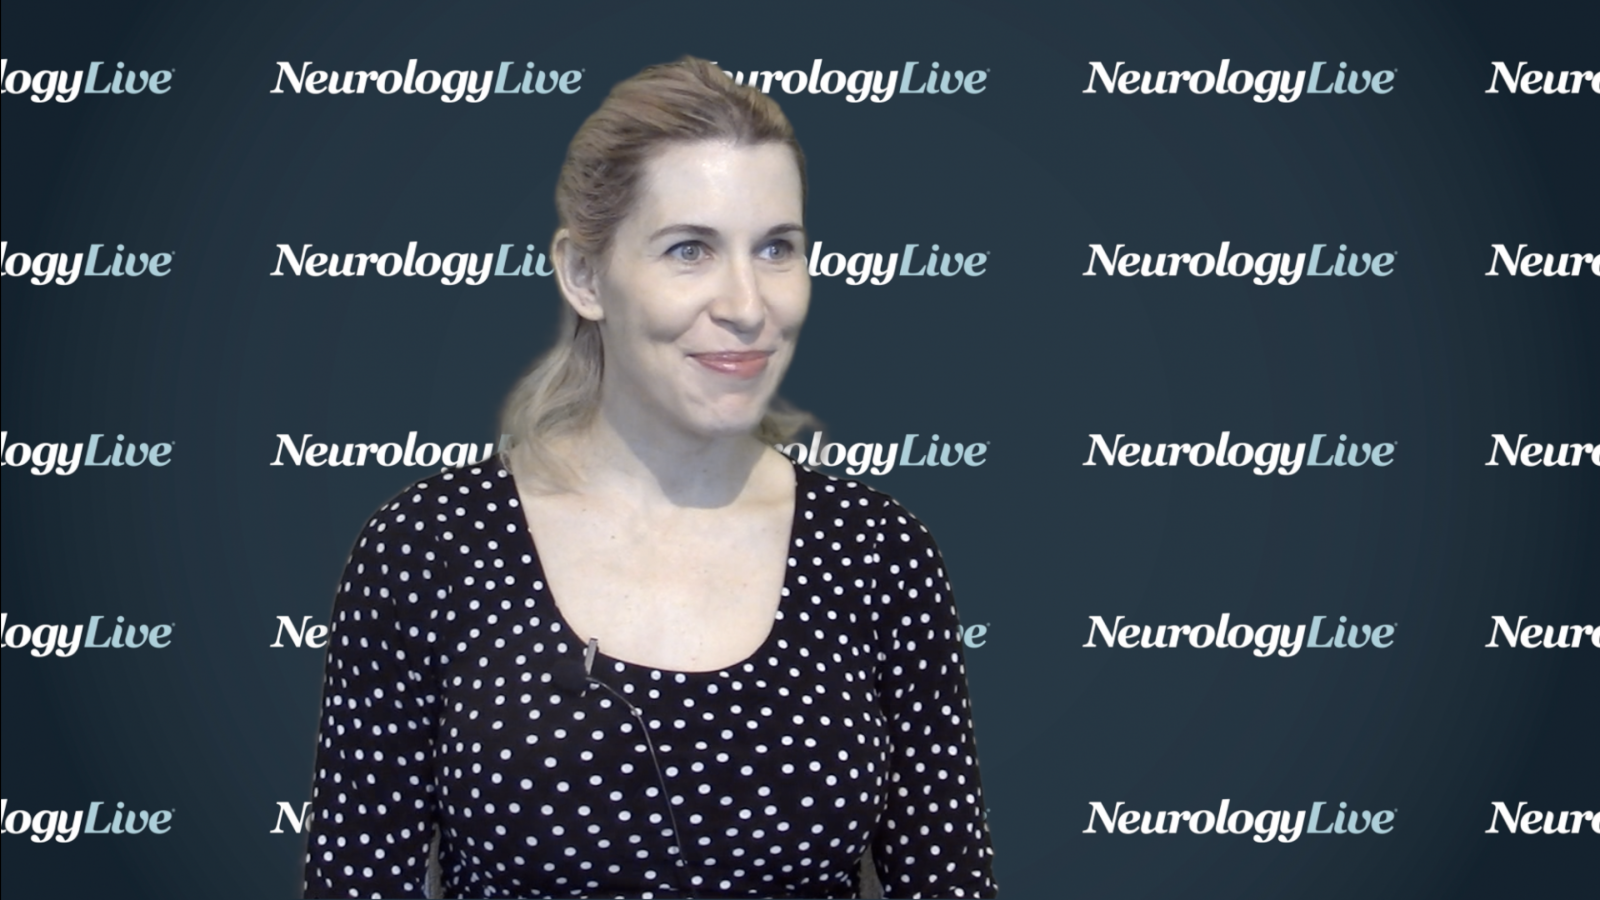 Emily Splichal, DPM: Using Texture for Nerve Stimulation in the Feet